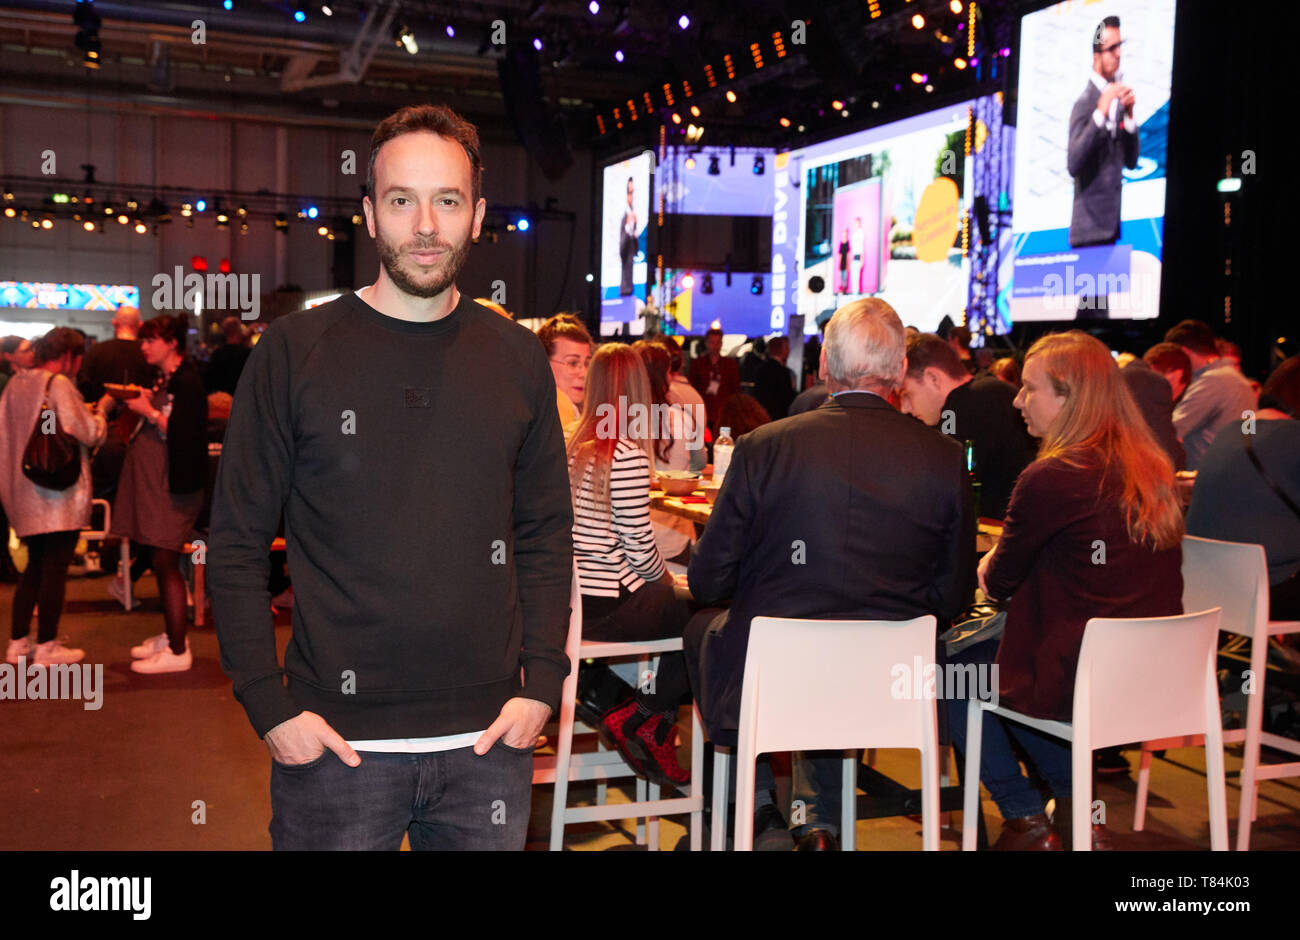 Hamburg, Germany. 07th May, 2019. Philipp Westermeyer, co-founder of OMR, stands in front of a stage at the marketing trade fair 'Online Marketing Rockstars' (OMR) in the exhibition halls. Credit: Georg Wendt/dpa/Alamy Live News Stock Photo